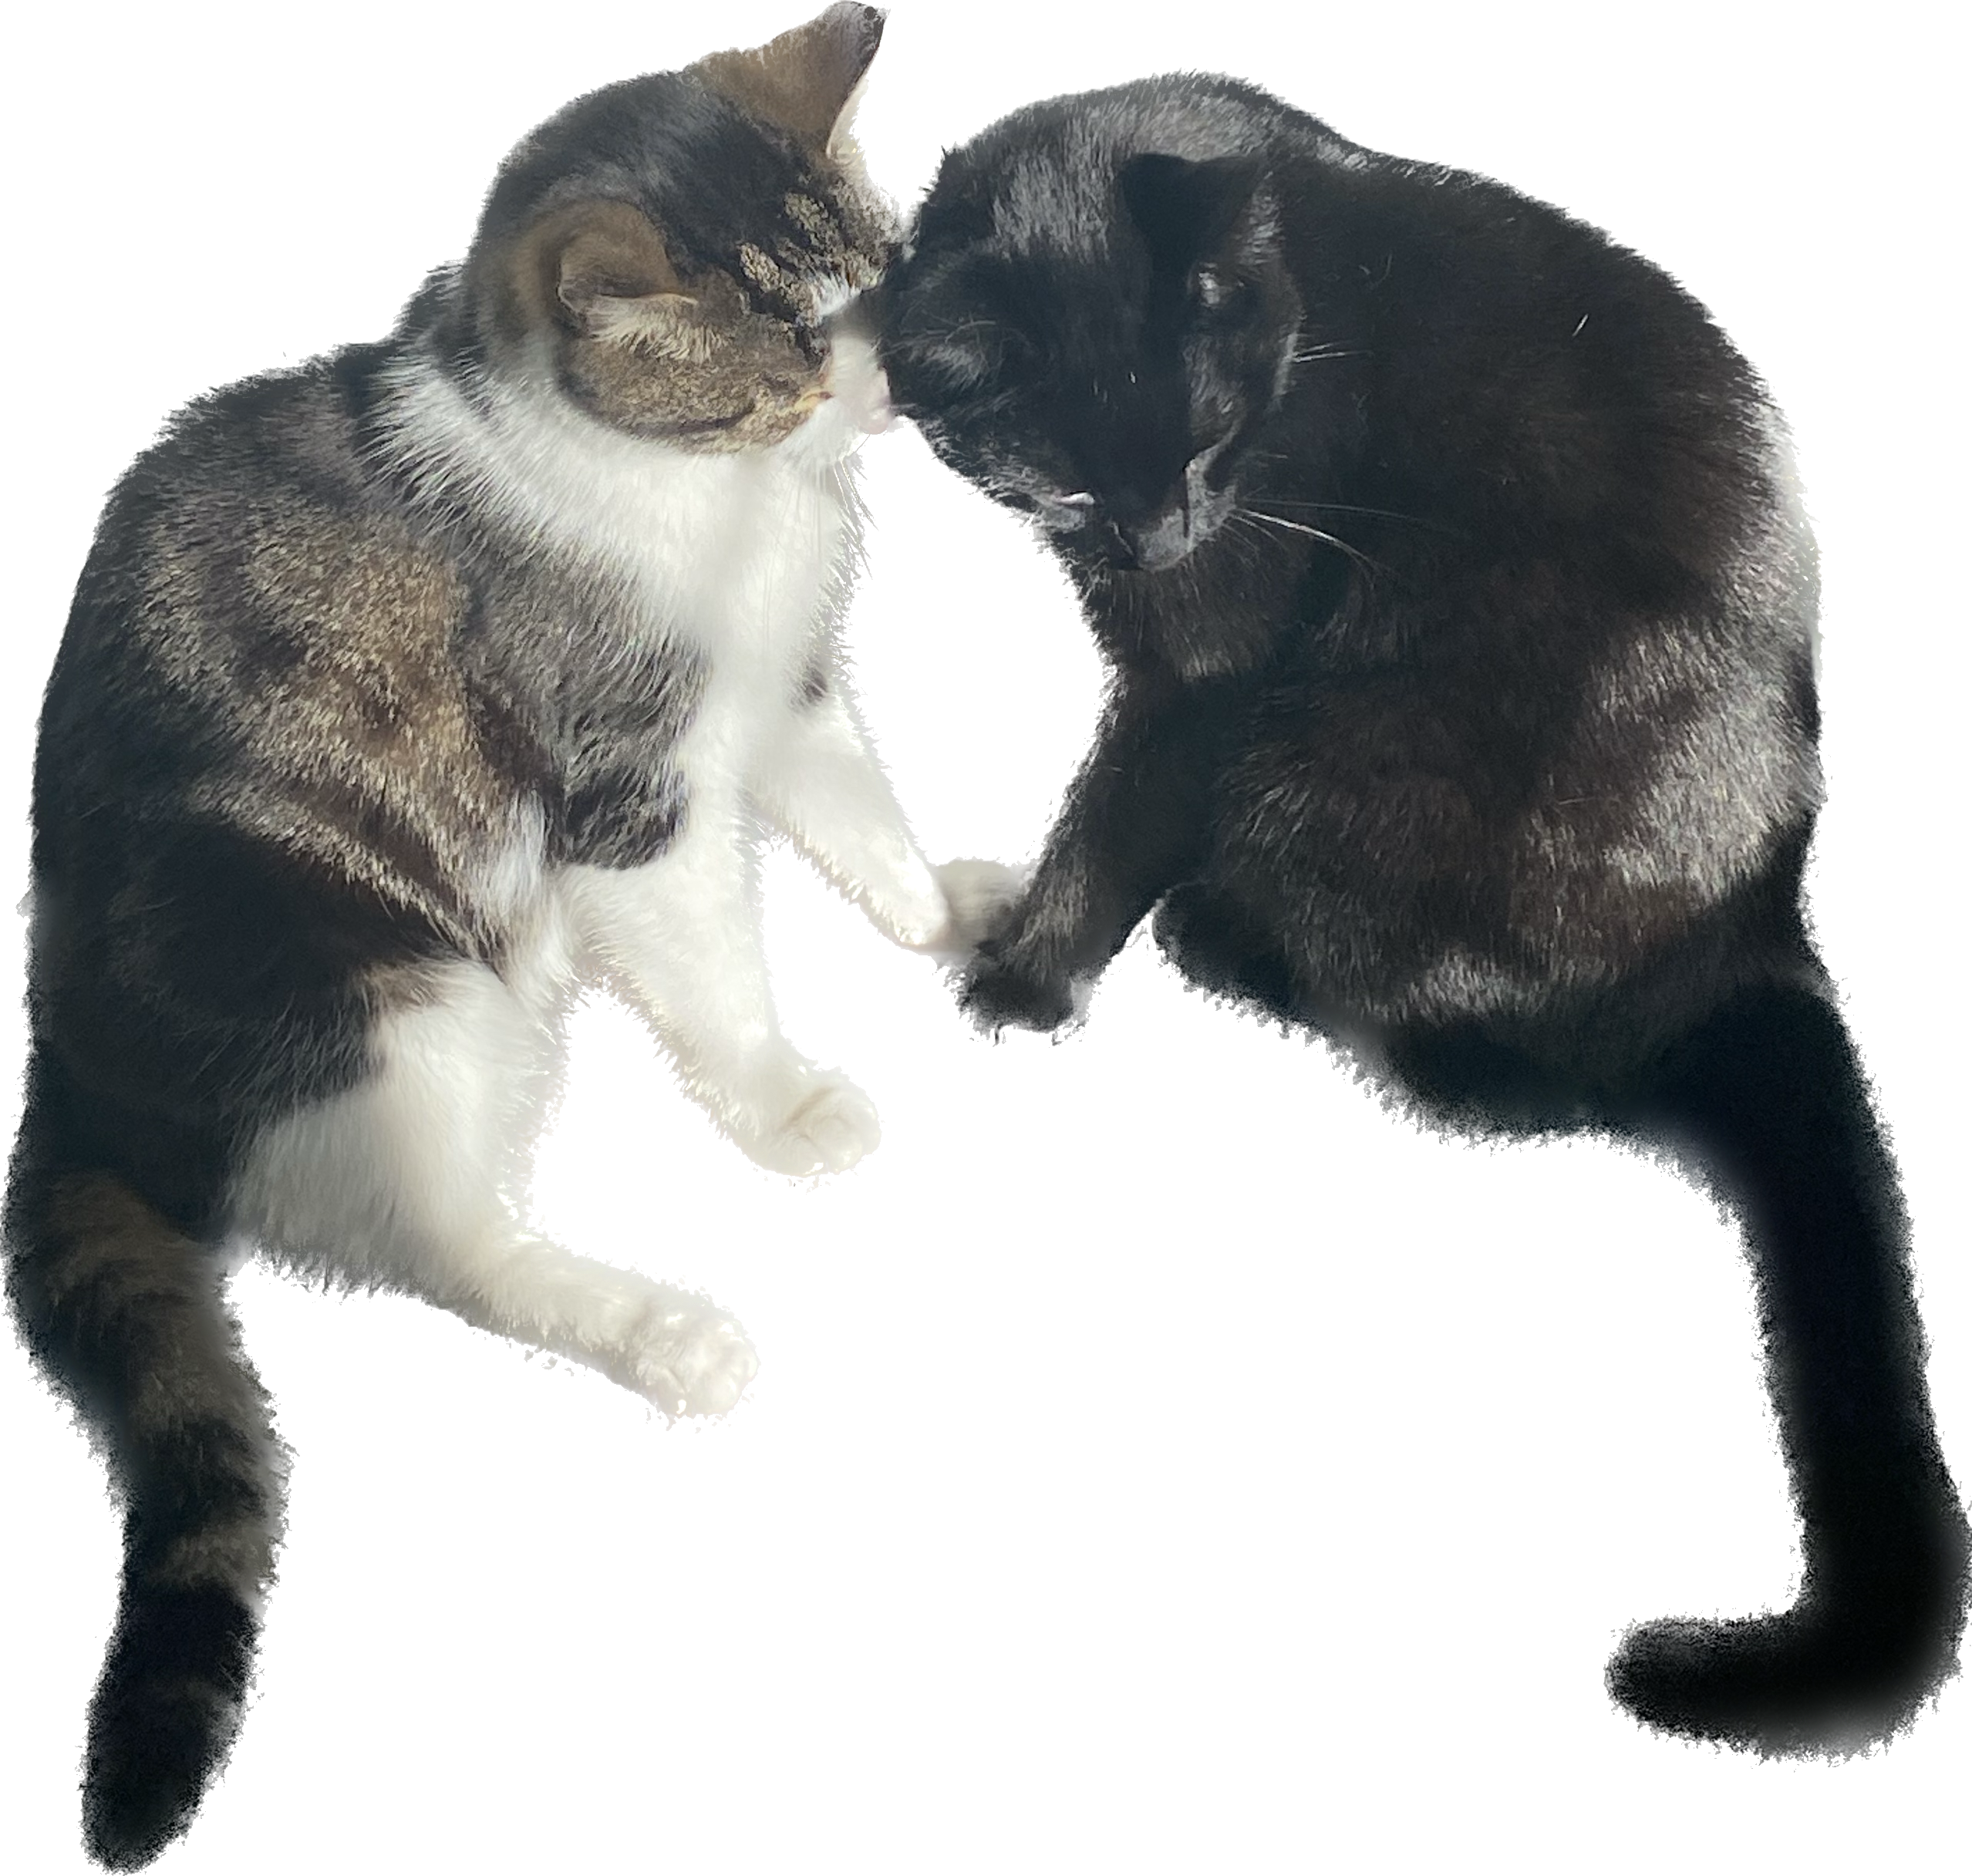 A picture of two cats, Elvis and Vlad, they're both sitting upright and their paws and faces are touching in a feline cuddle.